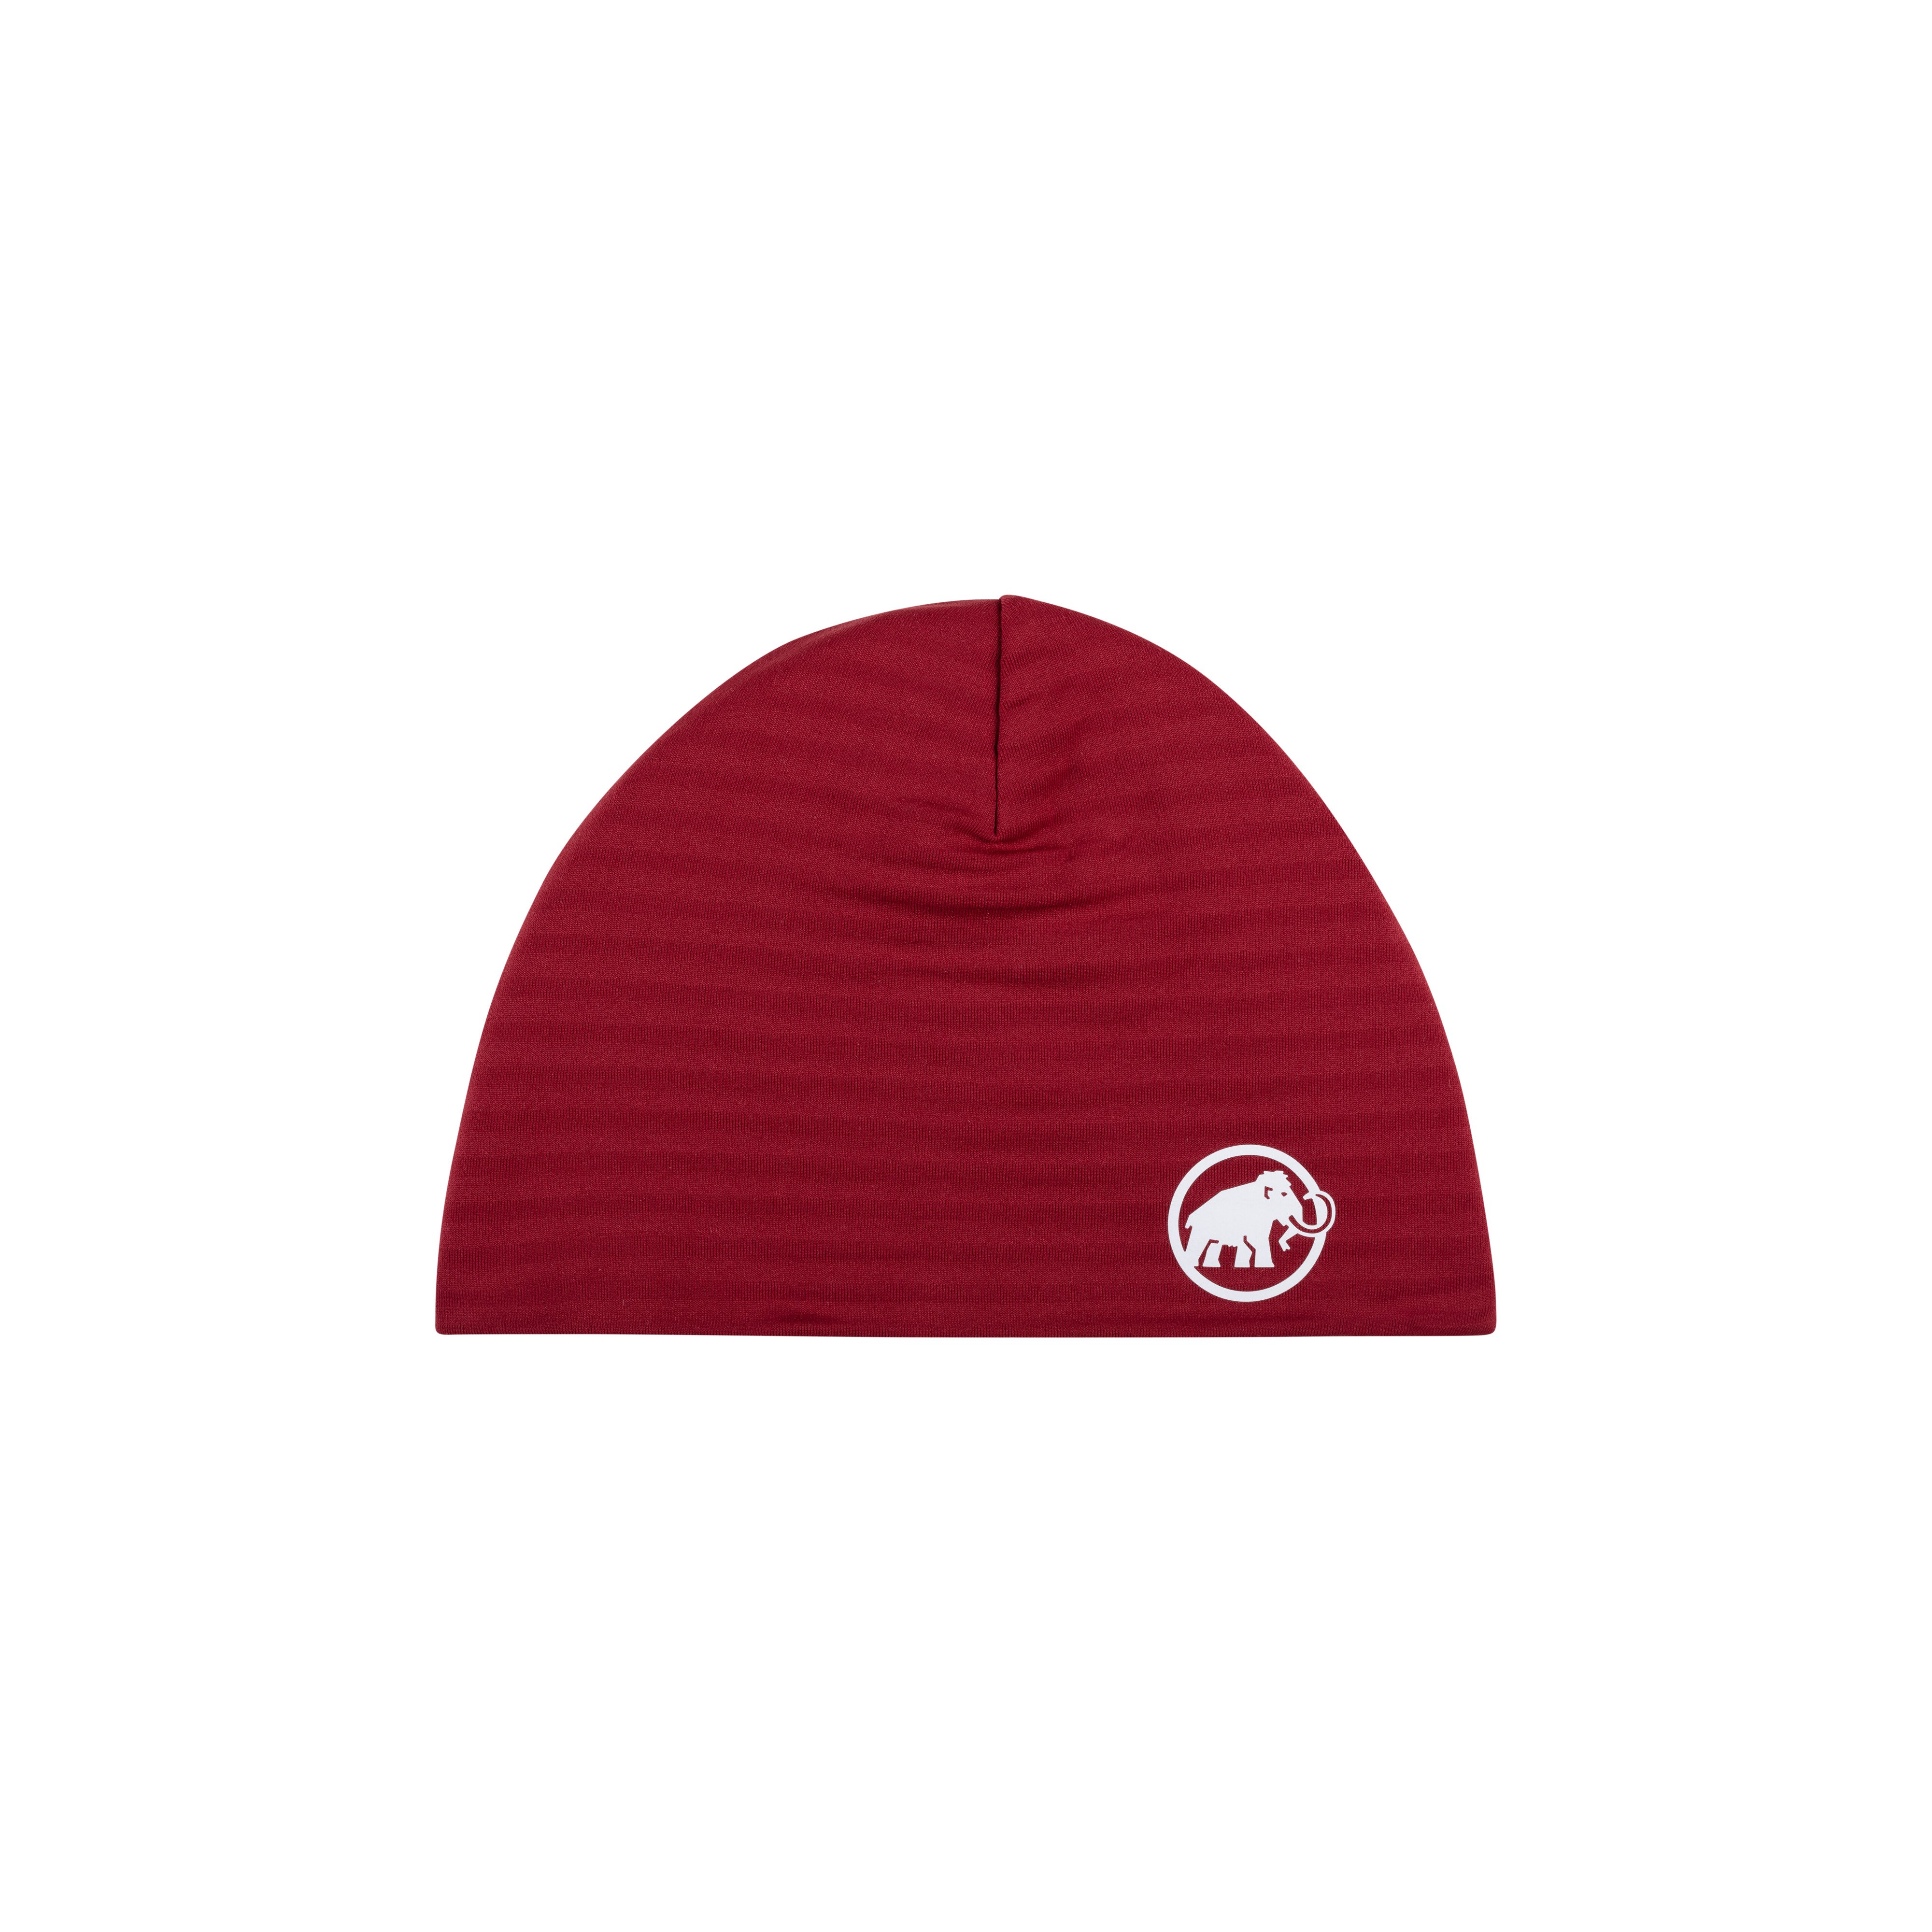 Aconcagua Light Beanie - blood red, one size thumbnail